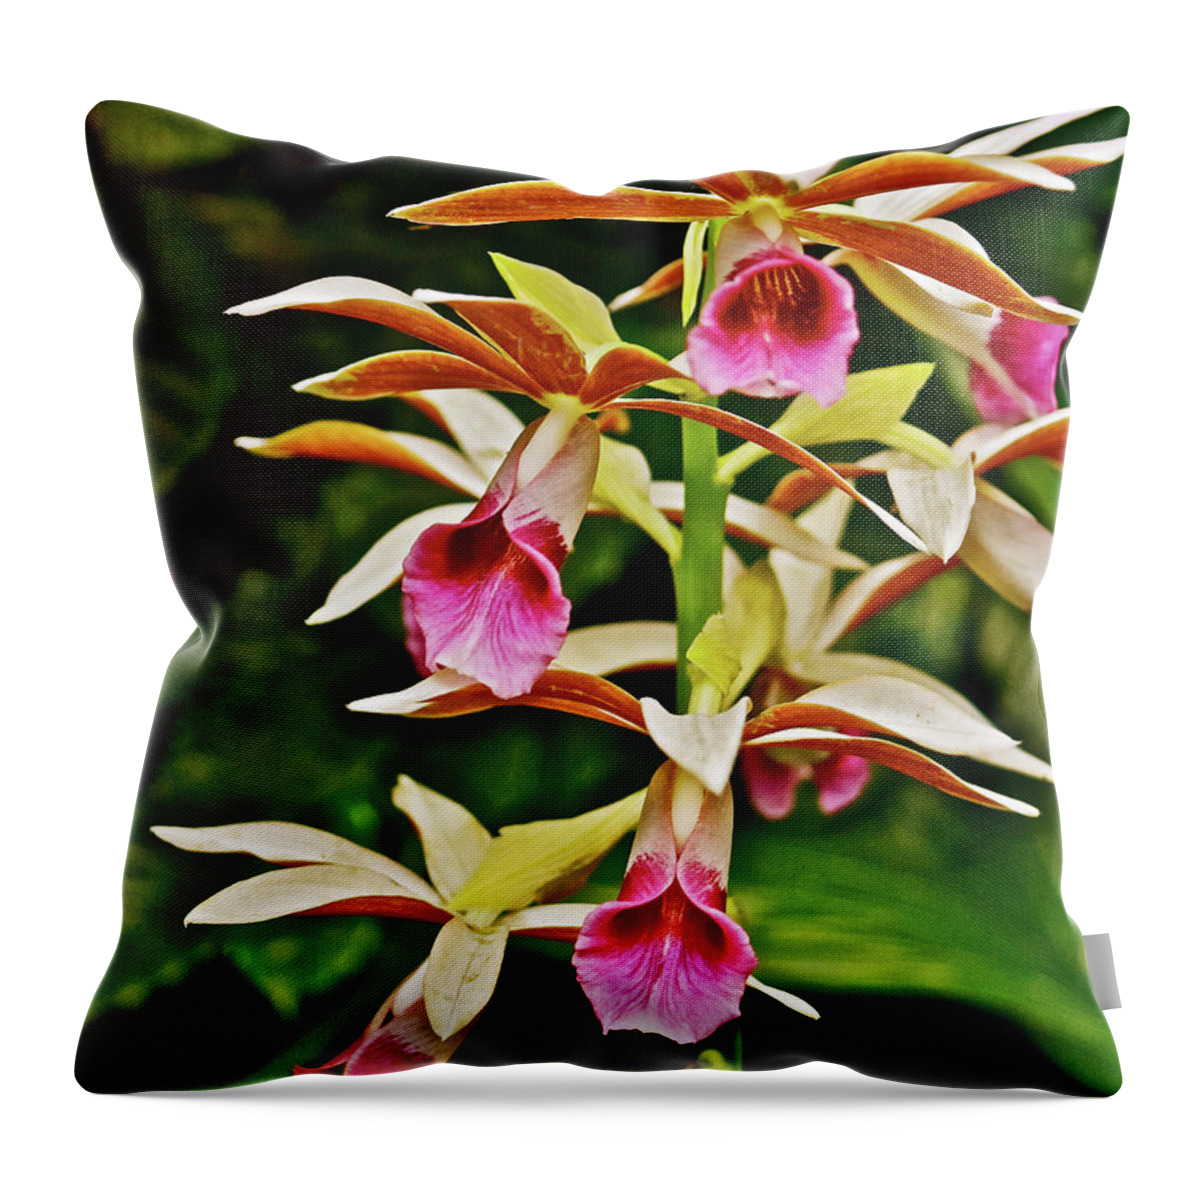 Nun Orchids Throw Pillow featuring the photograph Spring Show 16 Nun Orchids by Janis Senungetuk